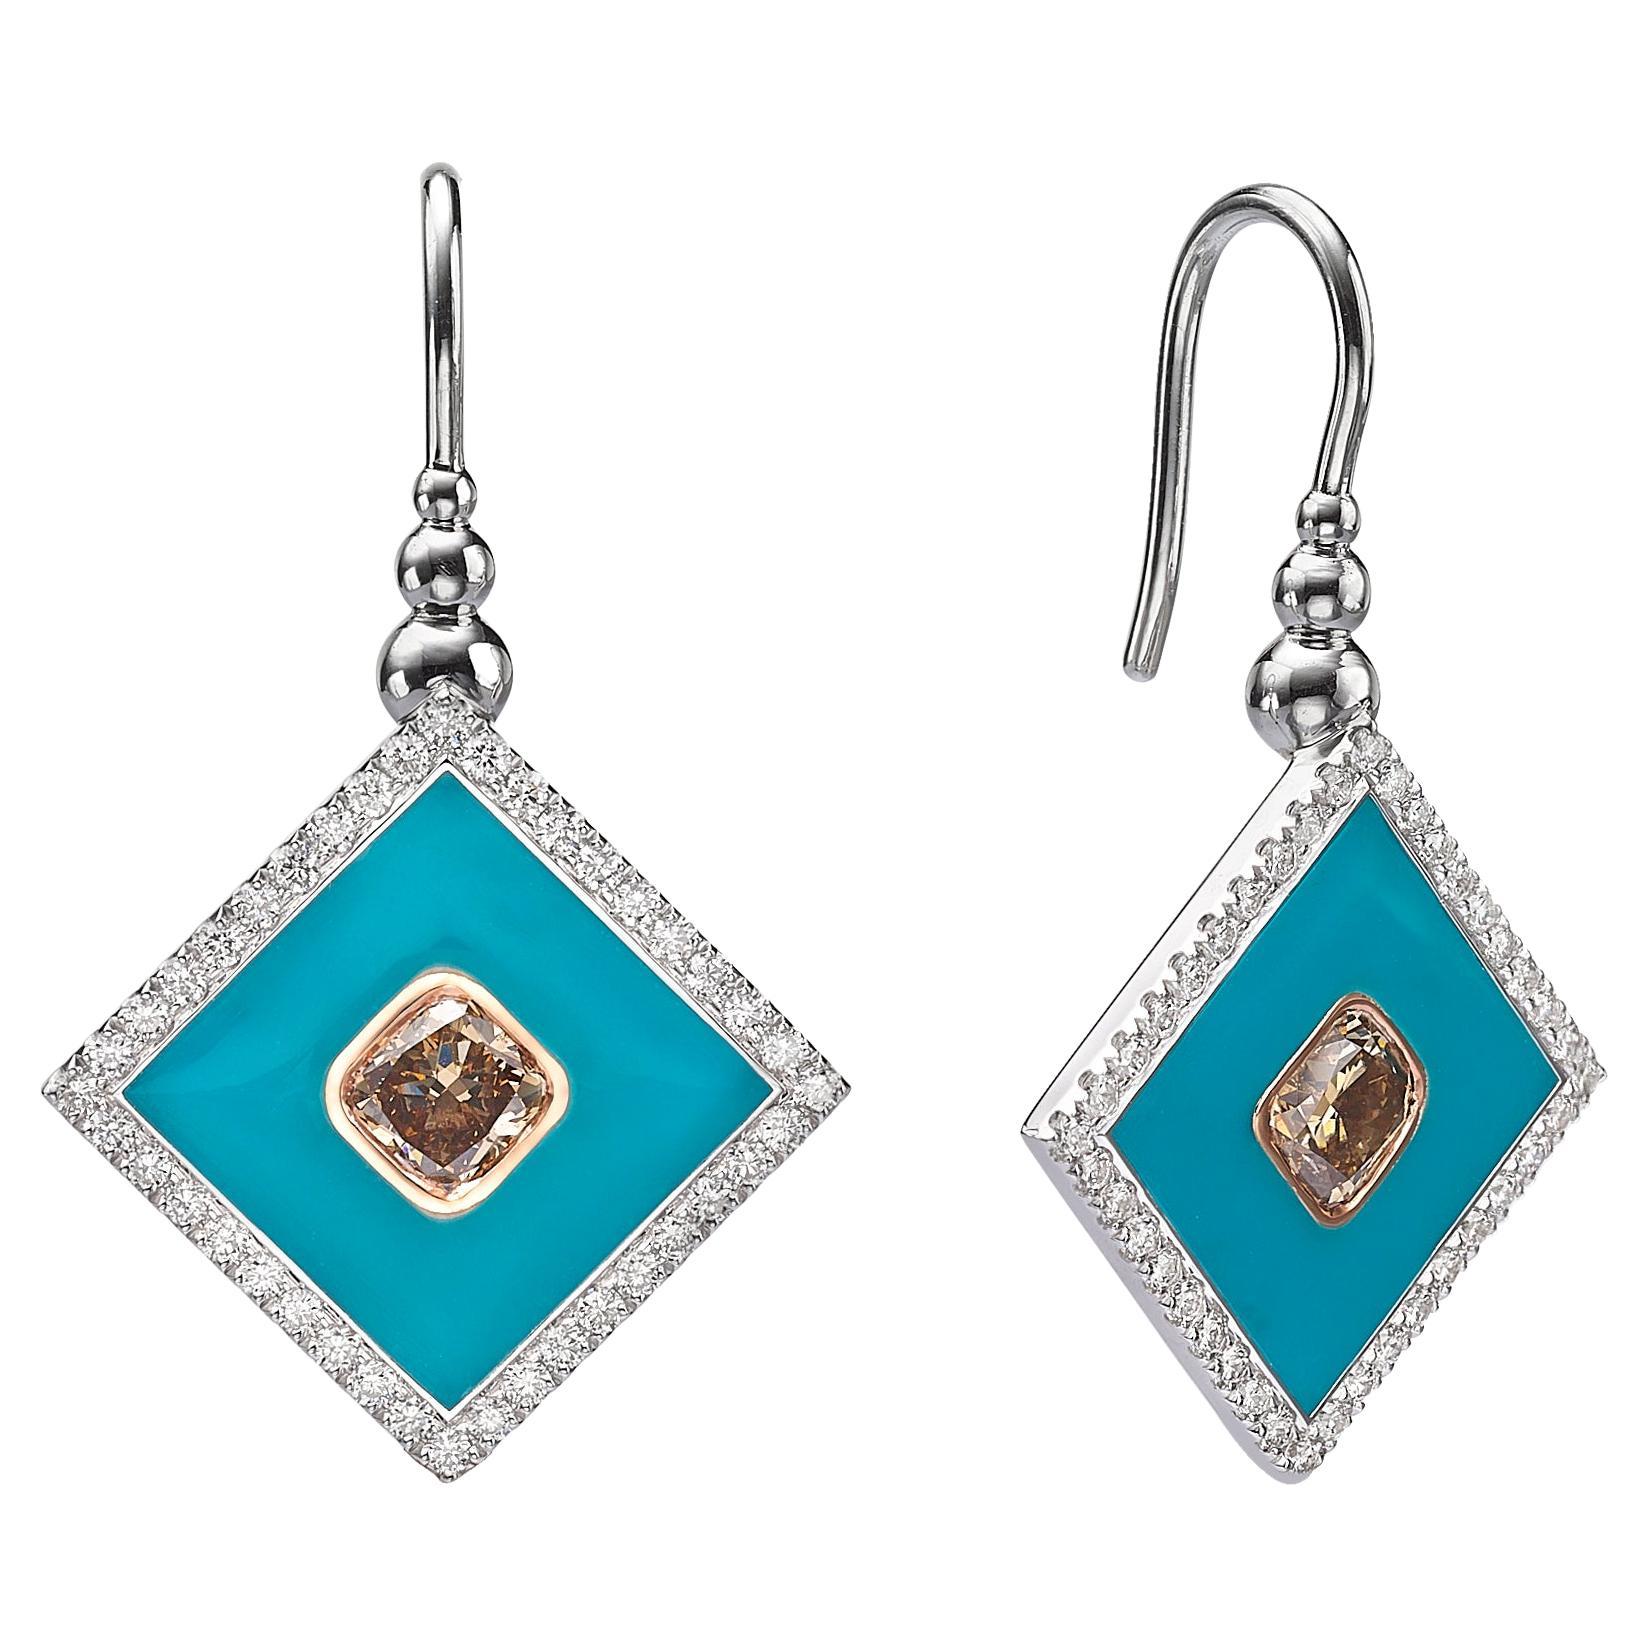 Venice Collection:Square-Shaped 18k White Gold Diamond Earrings with Blue Enamel